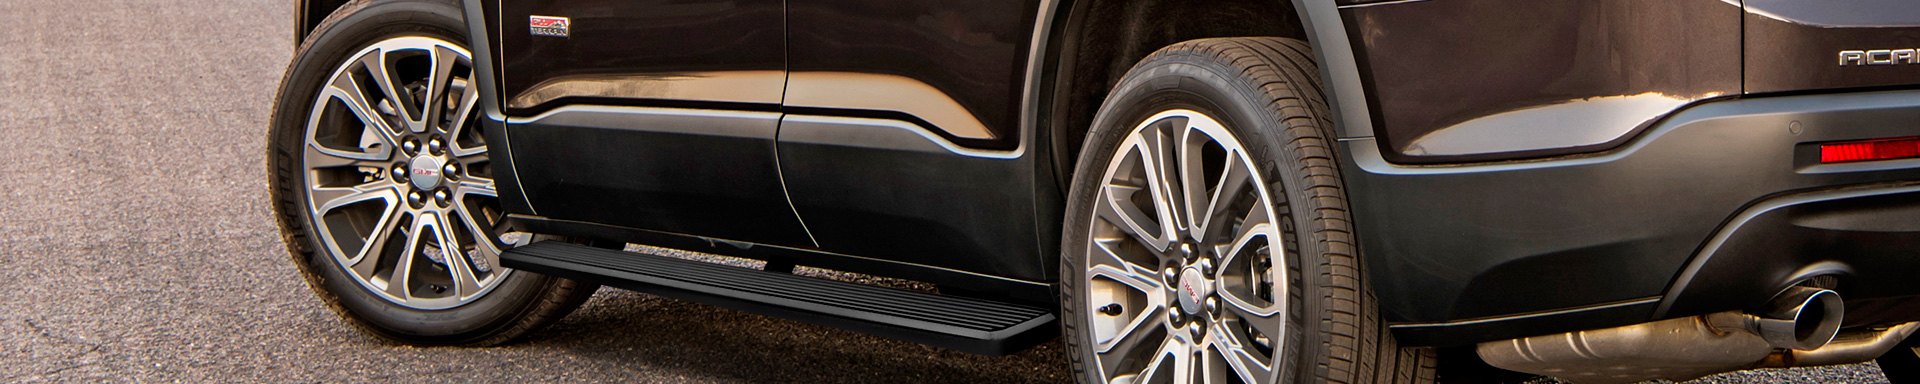 Accentuate The Exterior Look Of Your GMC Acadia With New APG iStep Running Boards